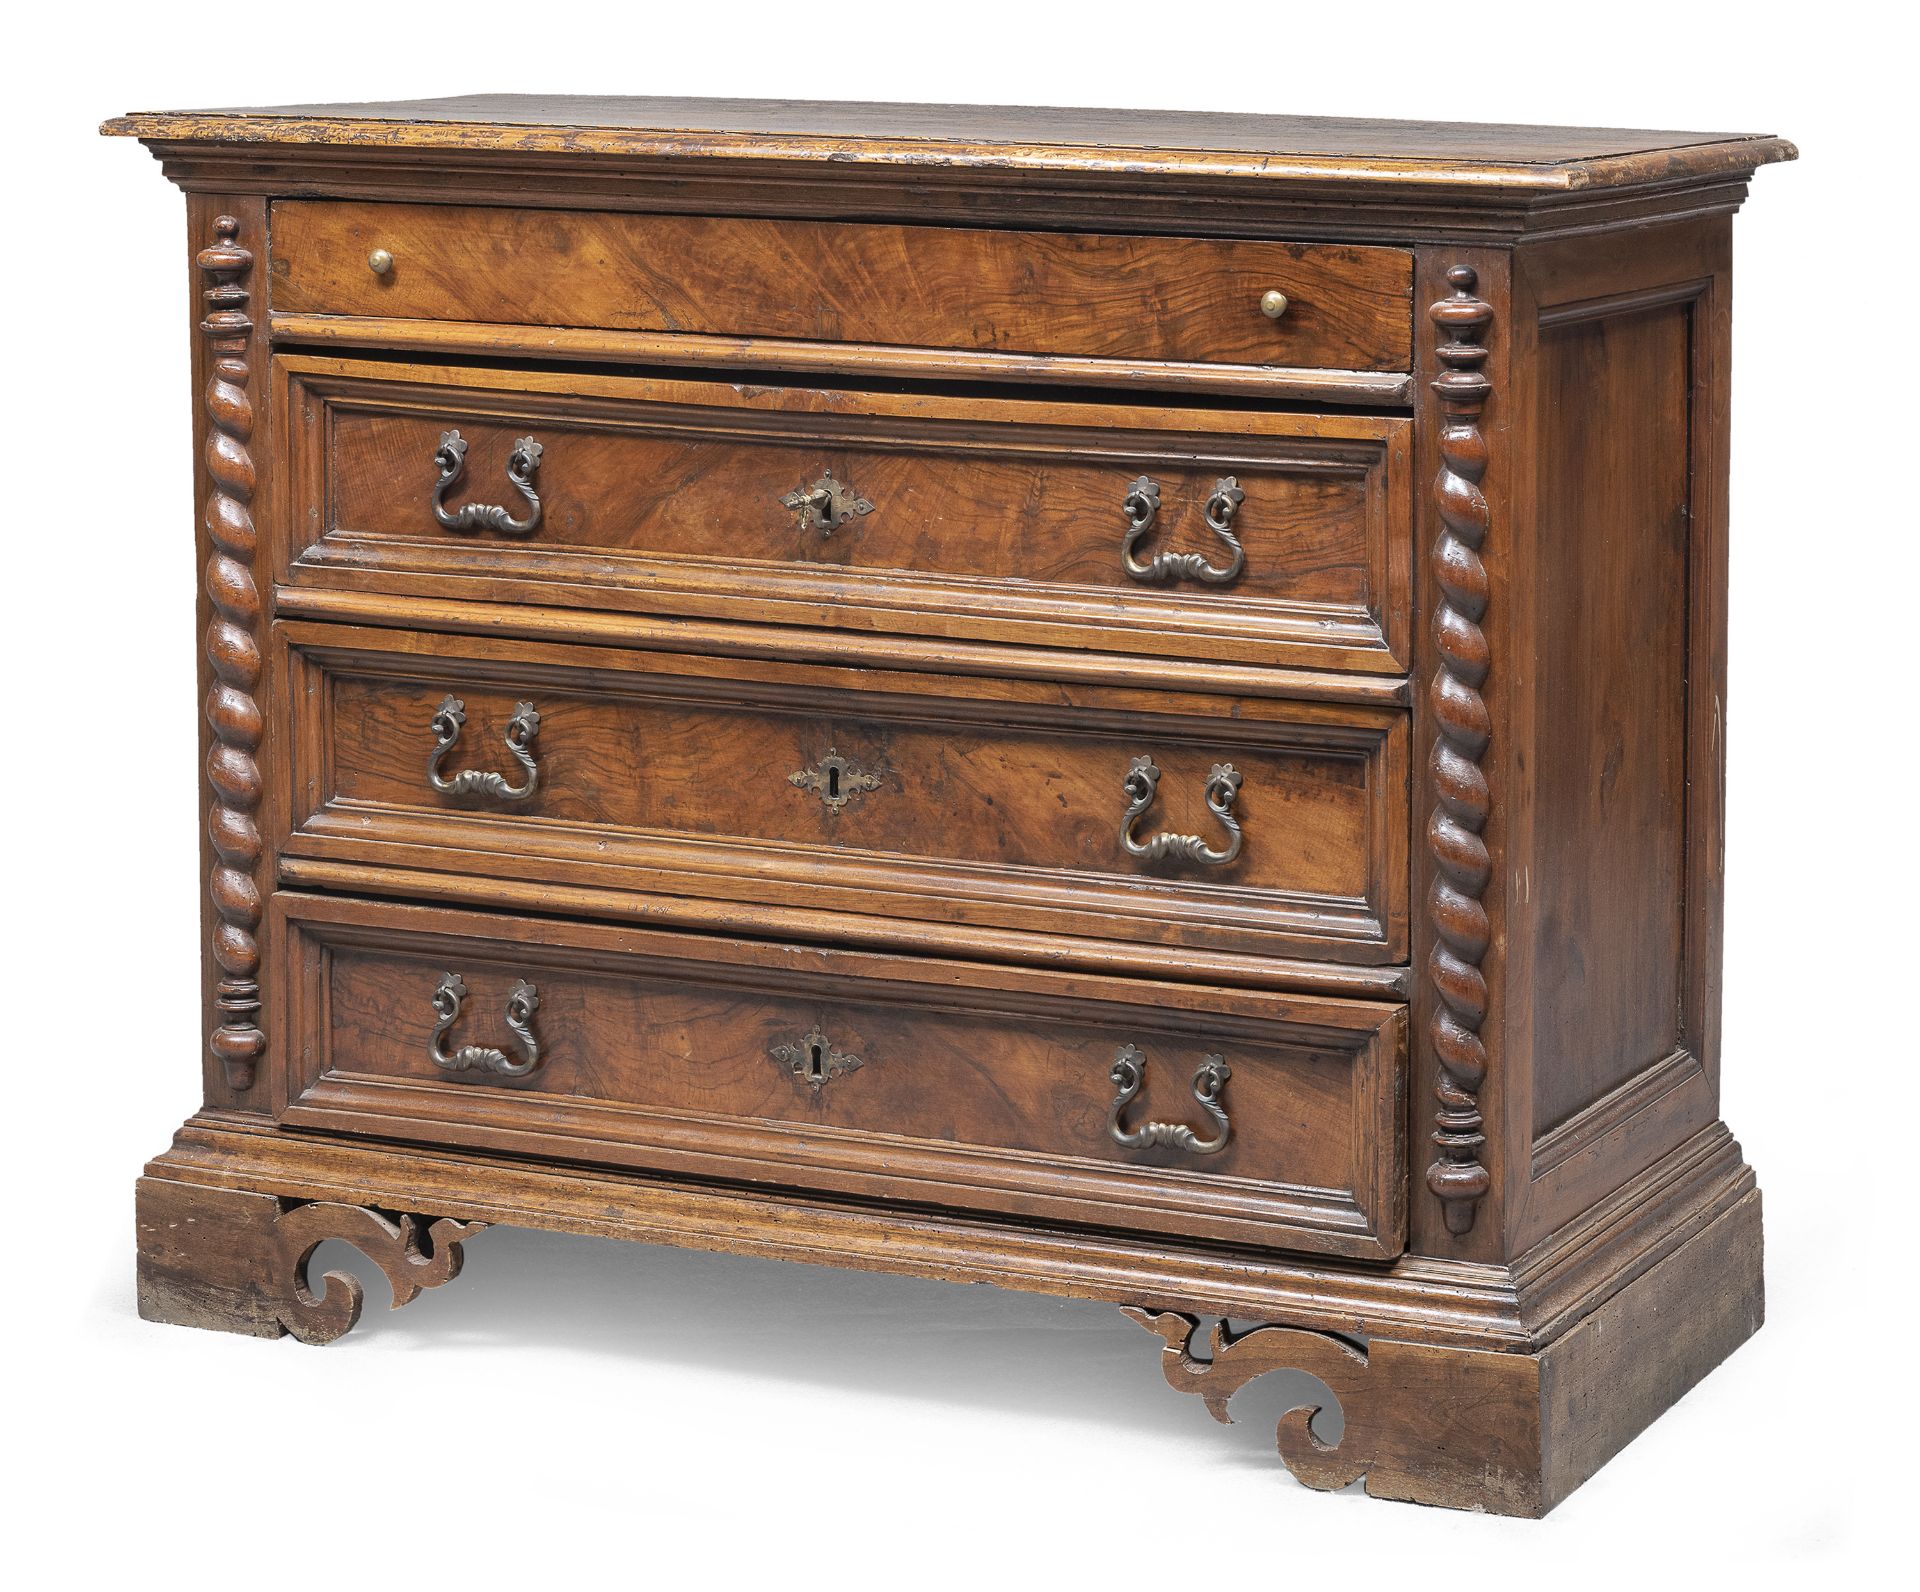 SMALL WALNUT AND WALNUT BRIAR CHEST CENTRAL ITALY 18TH CENTURY